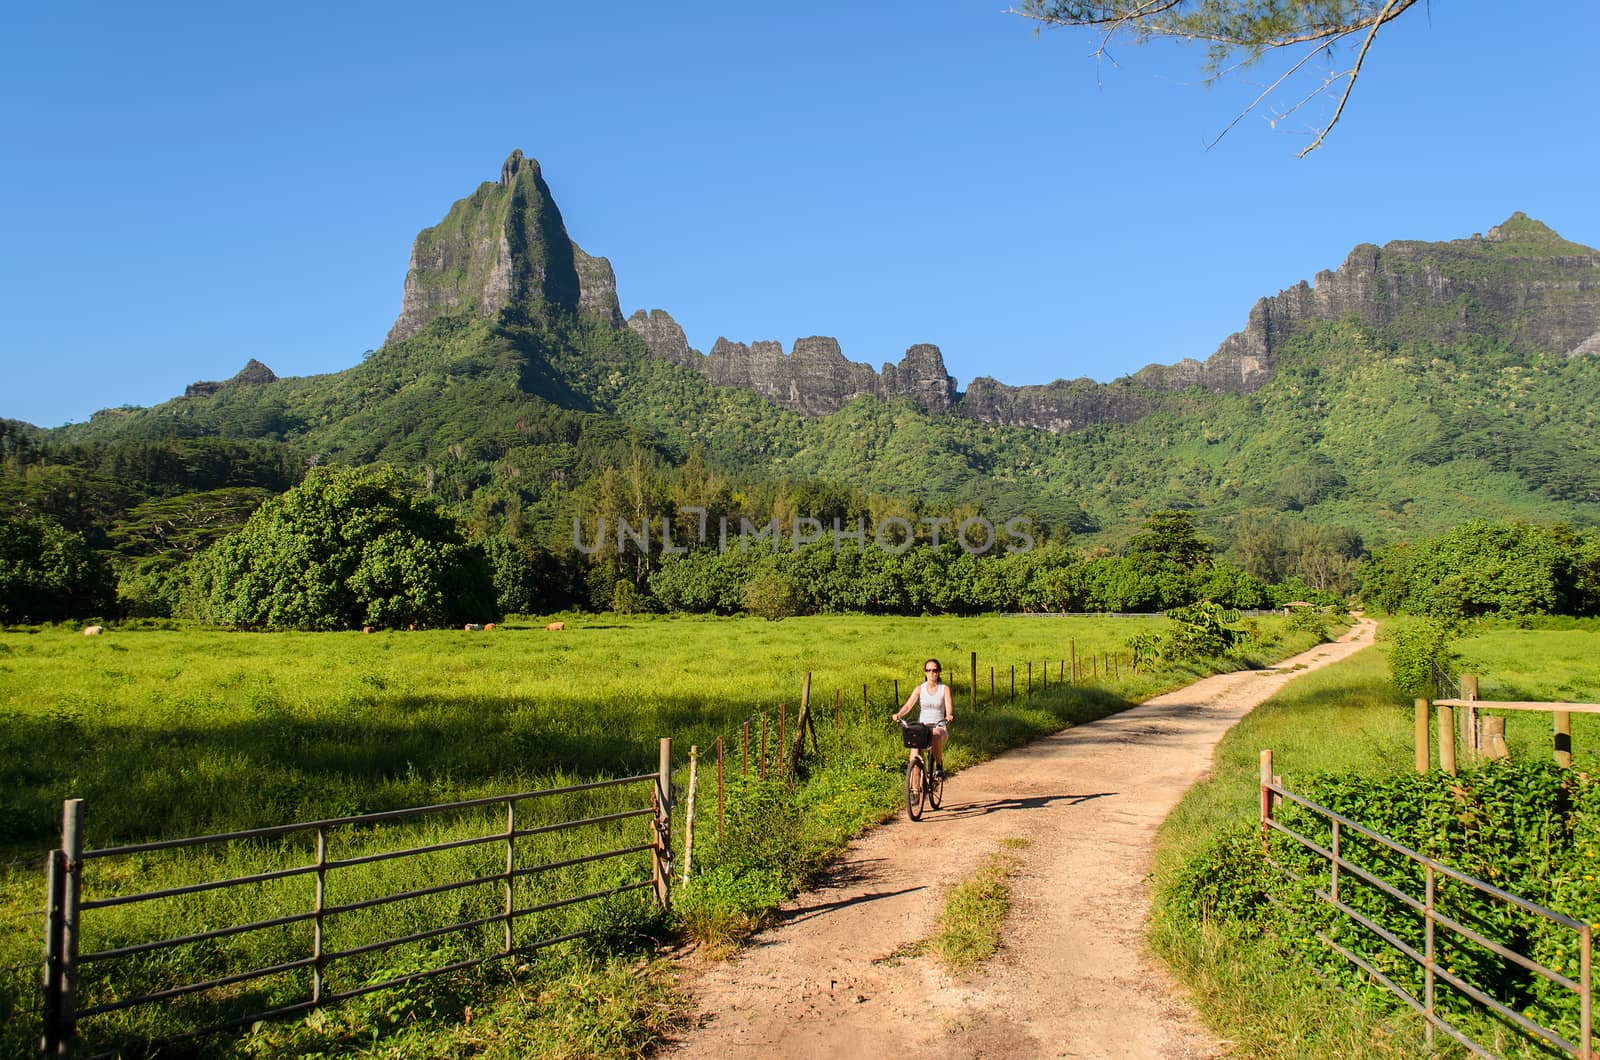 Female tourist cycling on a dirt road with Rotui mountain in the background on the tropical island of Moorea, near Tahiti, in French Polynesia.